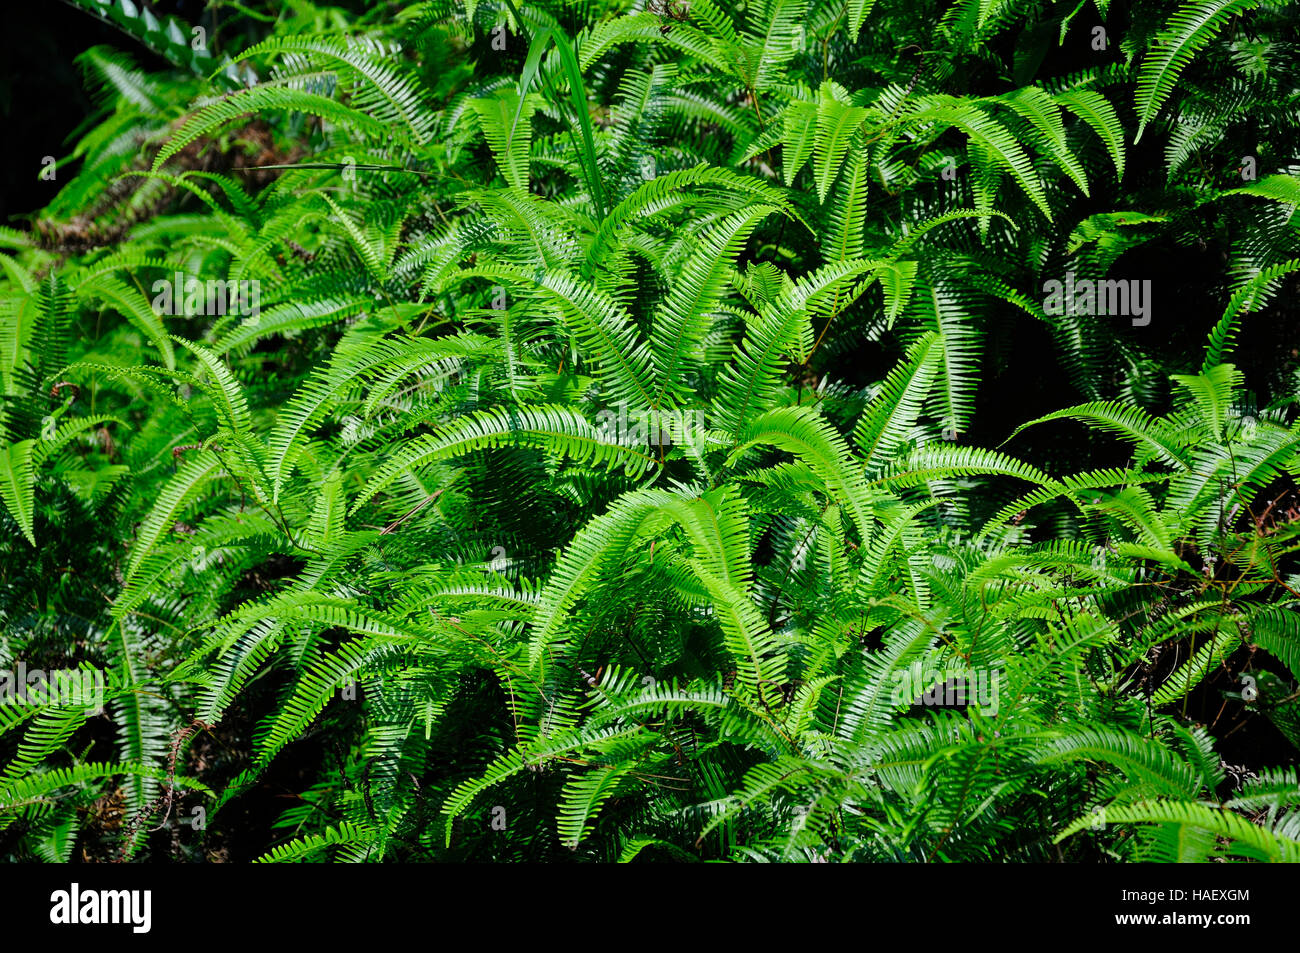 Adiantum Hispidulum, Rough Maidenhair fern or five fingered jack growing in the Wuyishan or mount wuyi scenic area in Fujian province China. Stock Photo